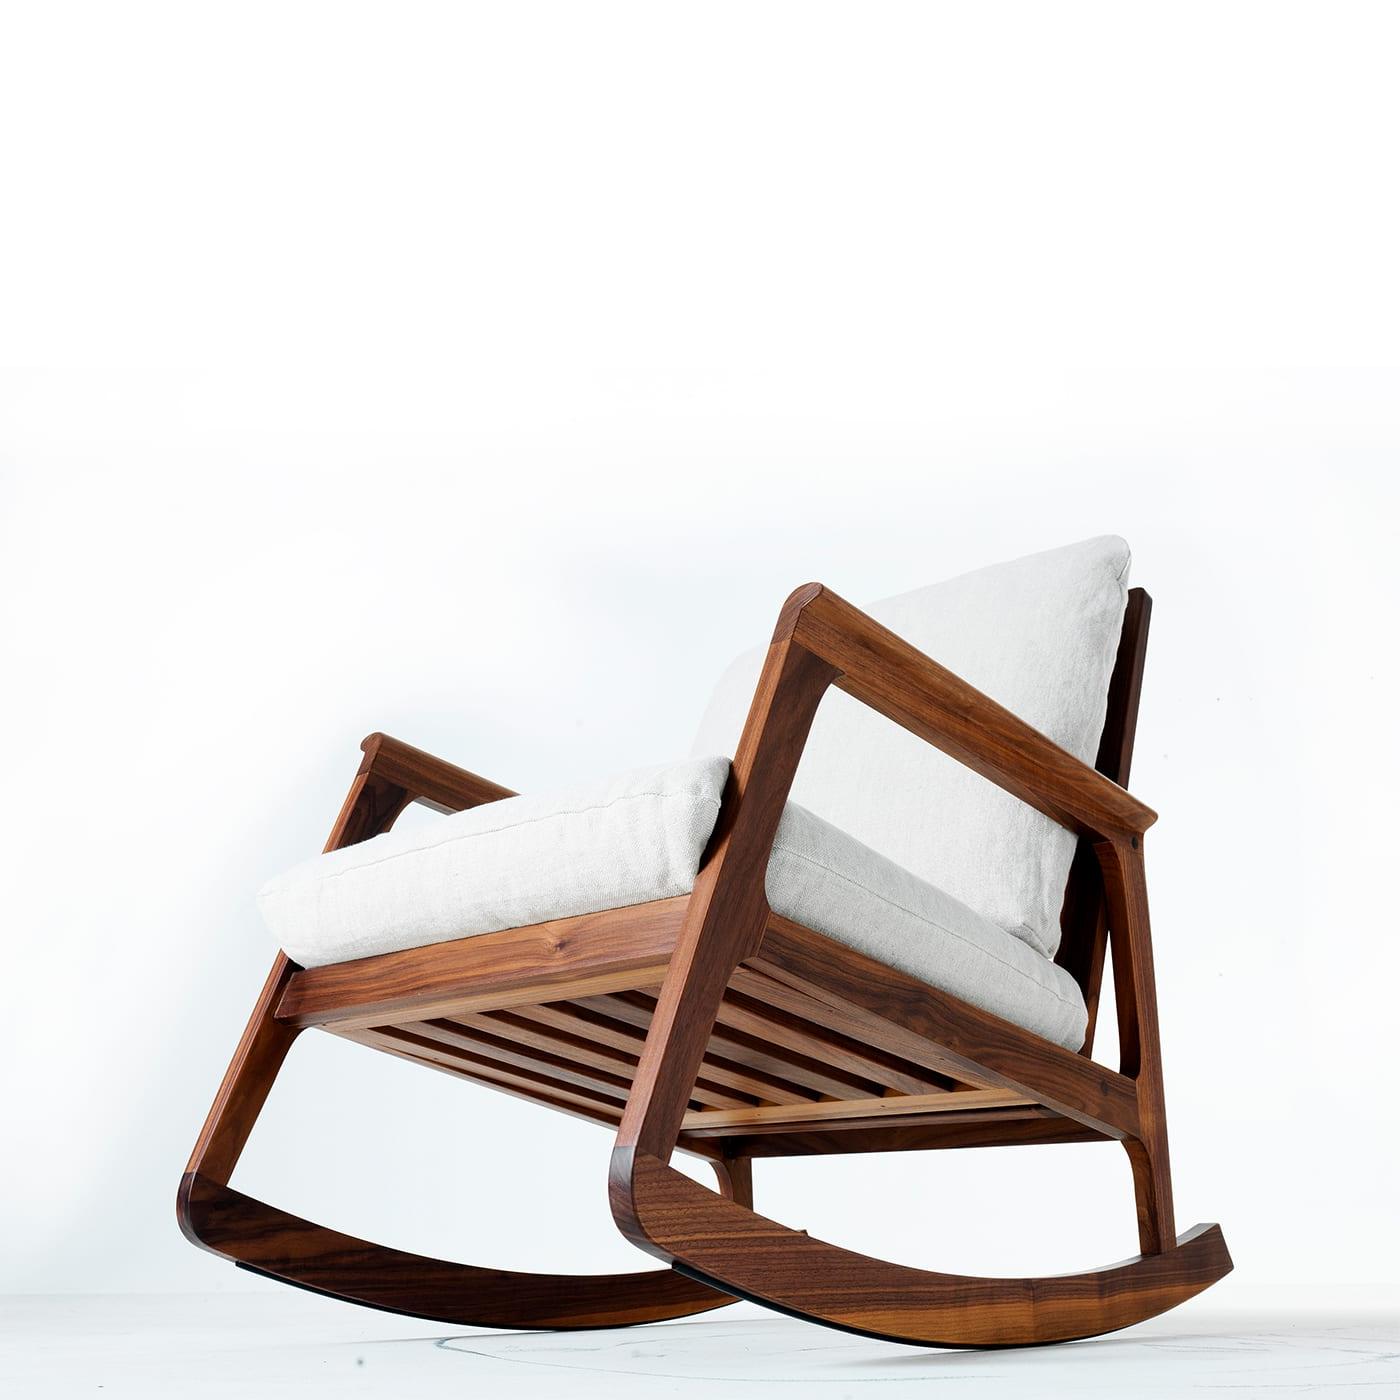 Momento Brown Rocking Chair ☞ Upholstery: Linen BEL-LINO G077 12